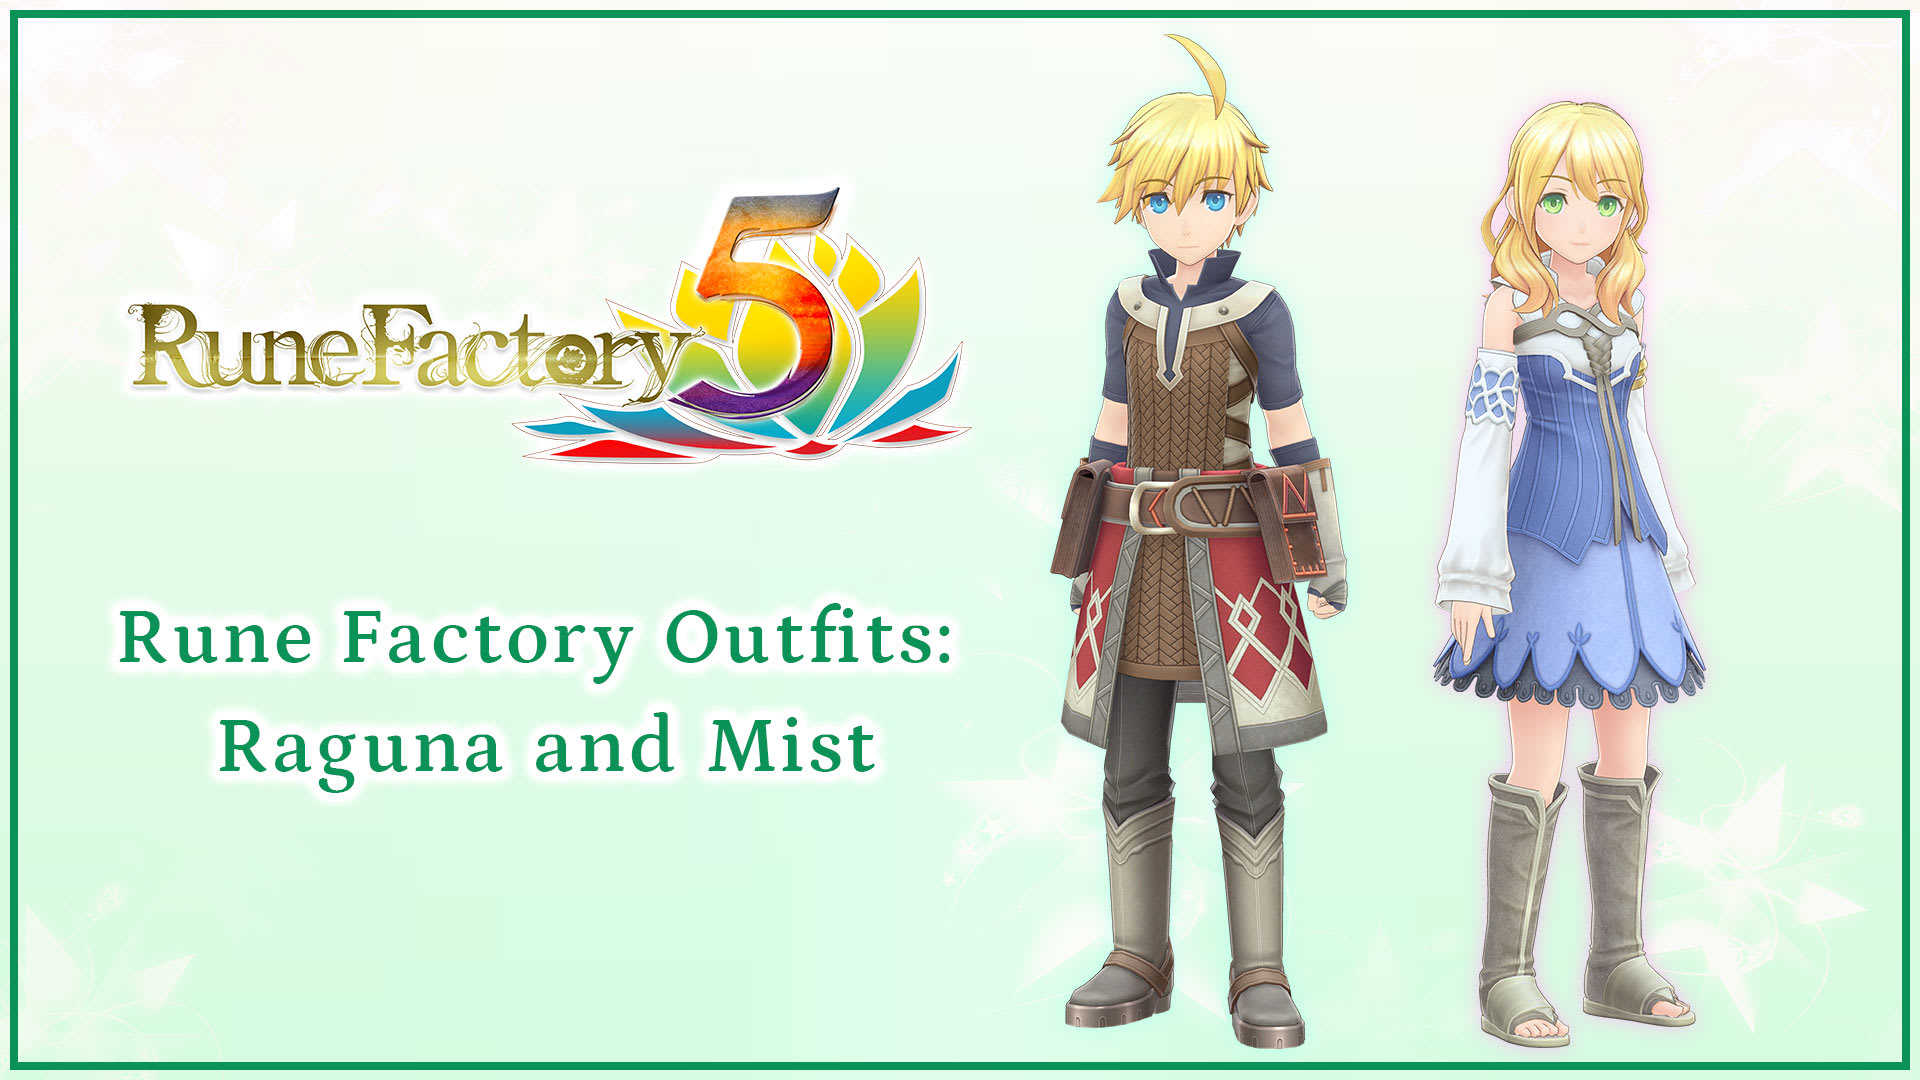 Rune Factory Outfits: Raguna and Mist